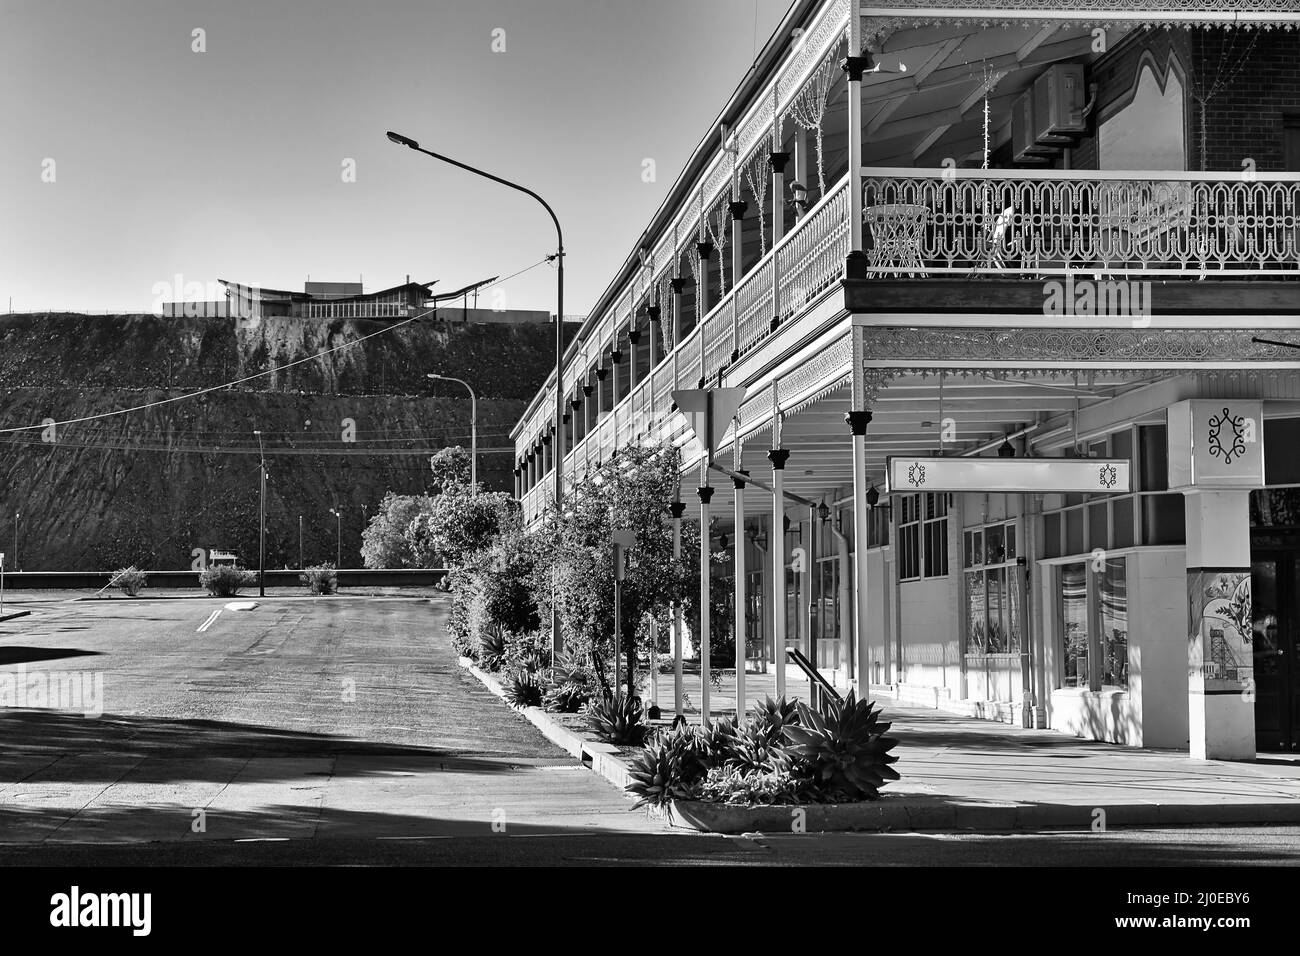 Black-white contrast streets and historic buildings of Broken hill australian outback mining town towards Line of Lode memorial. Stock Photo